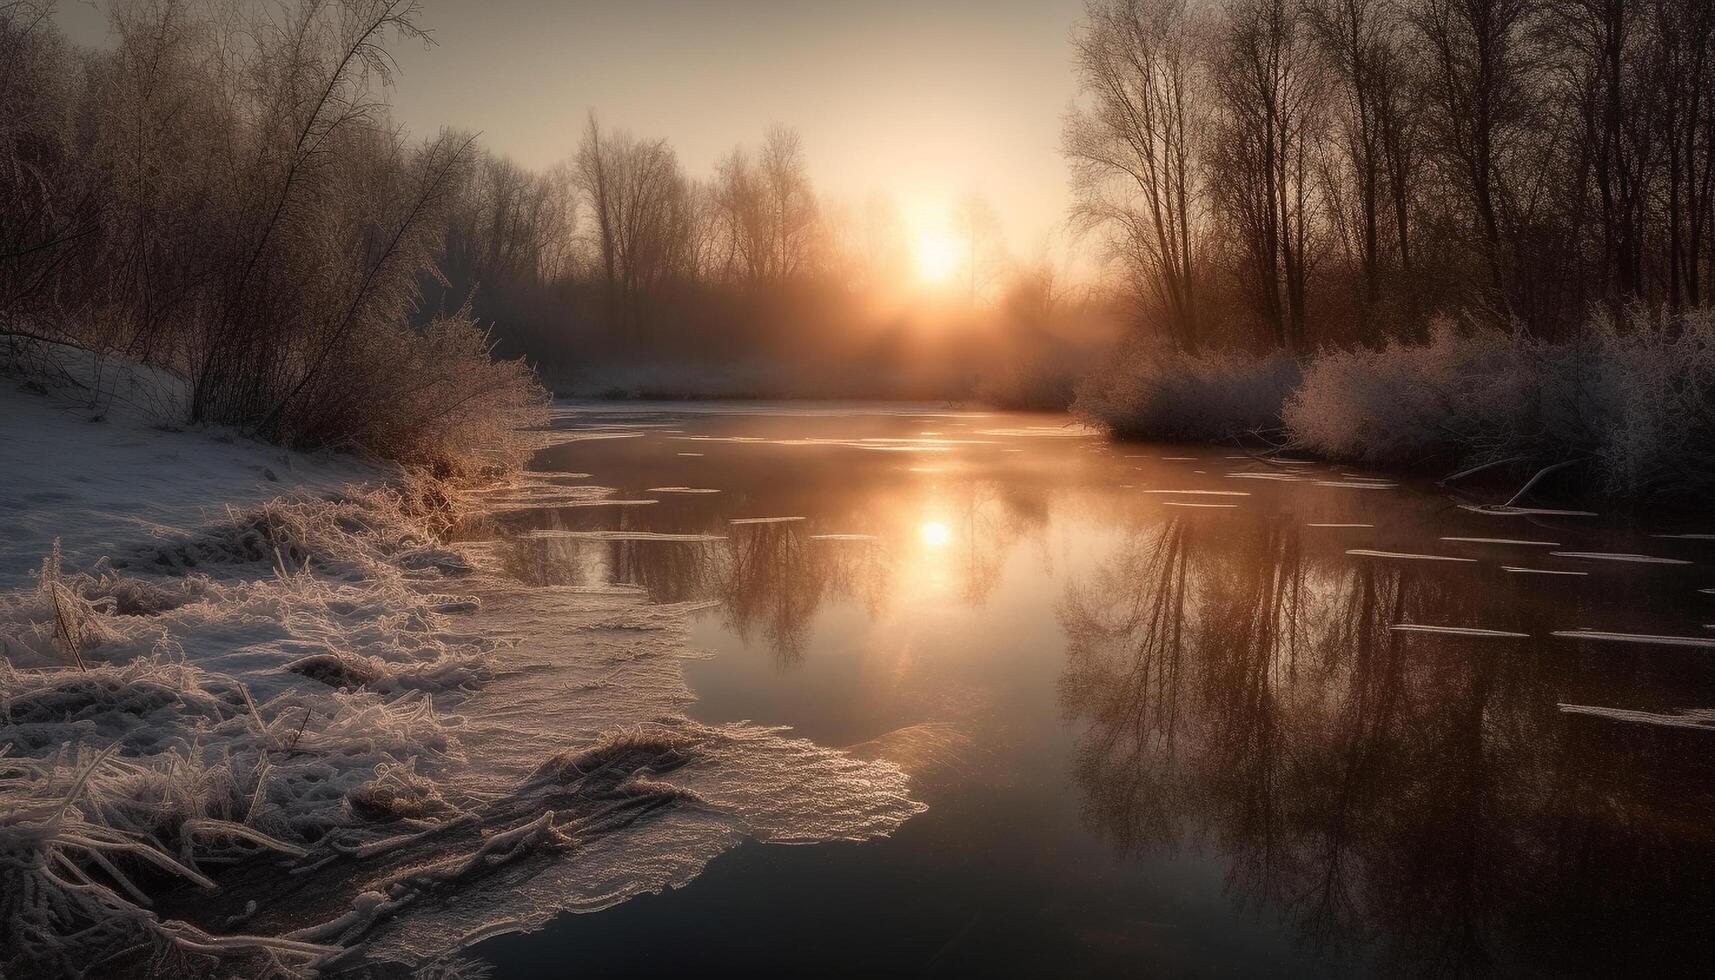 Tranquil scene of winter forest, sunset reflection on frozen pond generated by AI photo